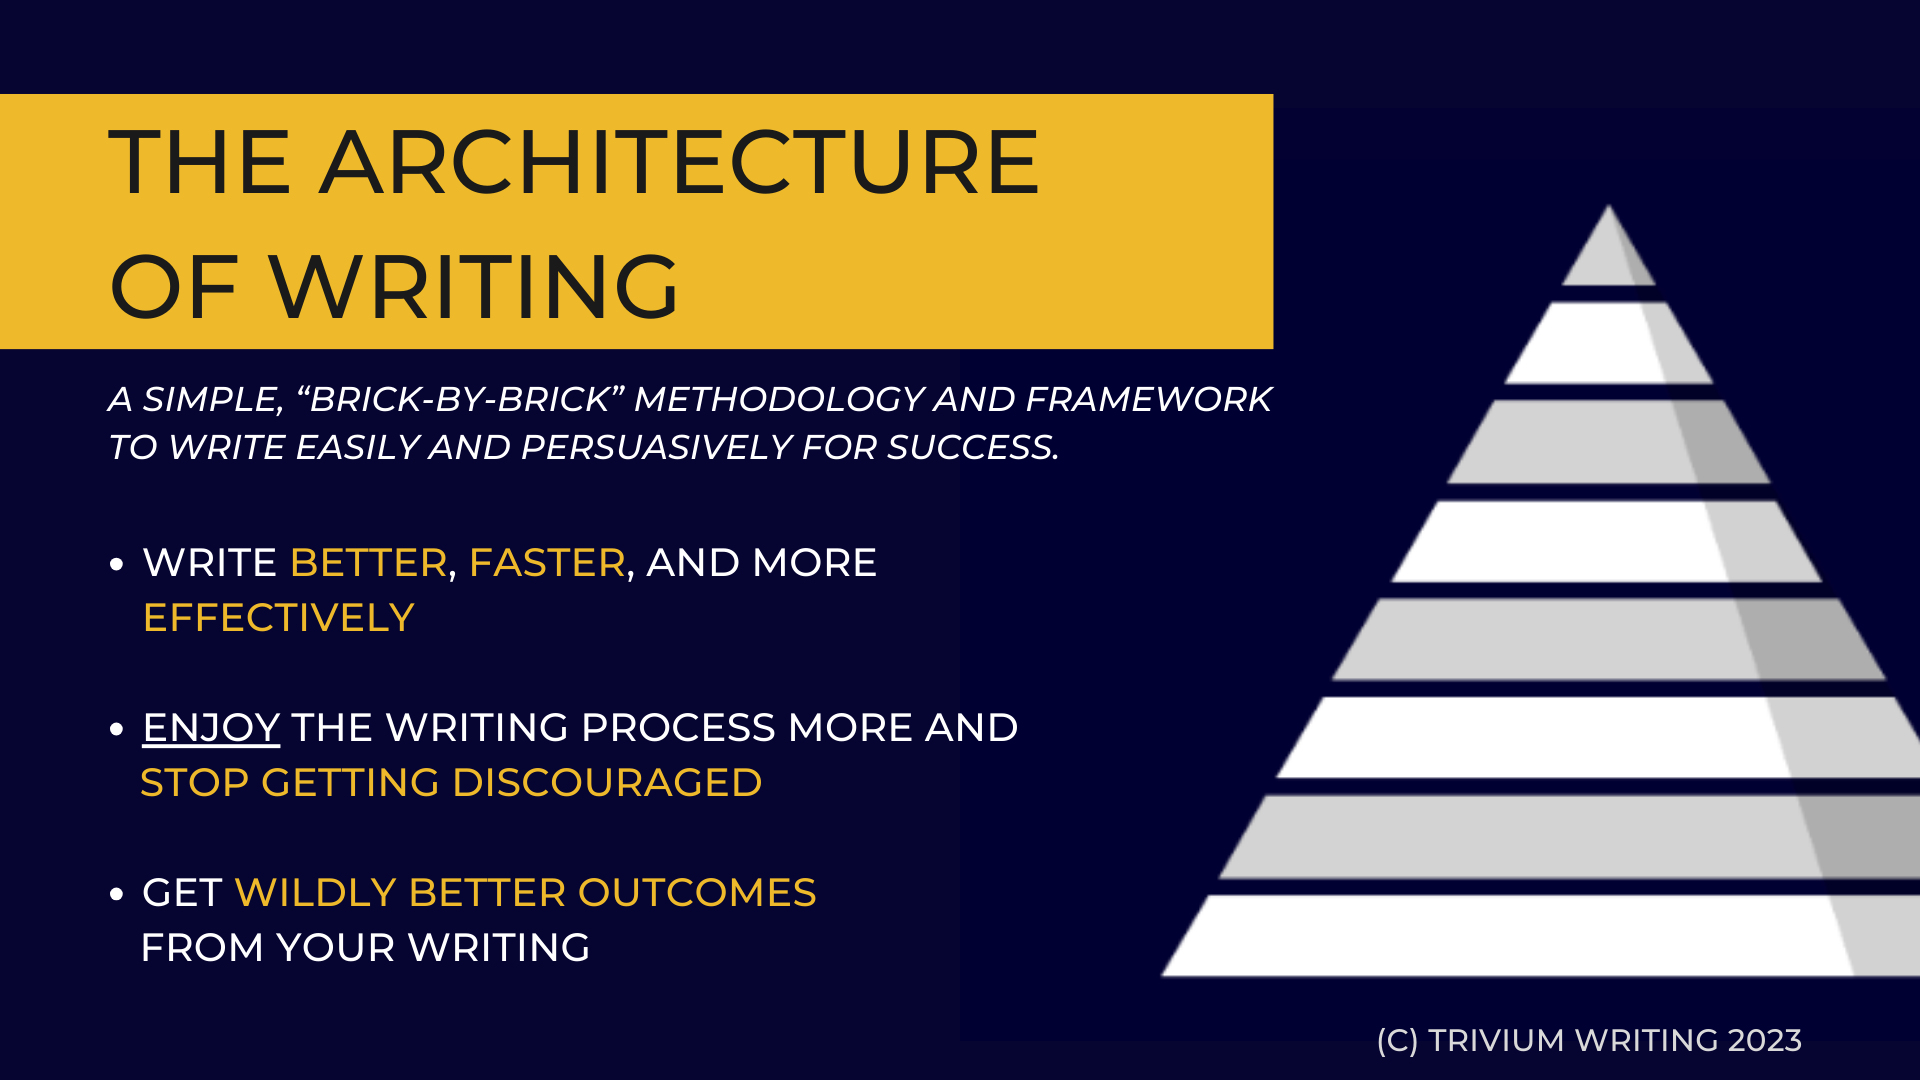 The Architecture of Writing Framework